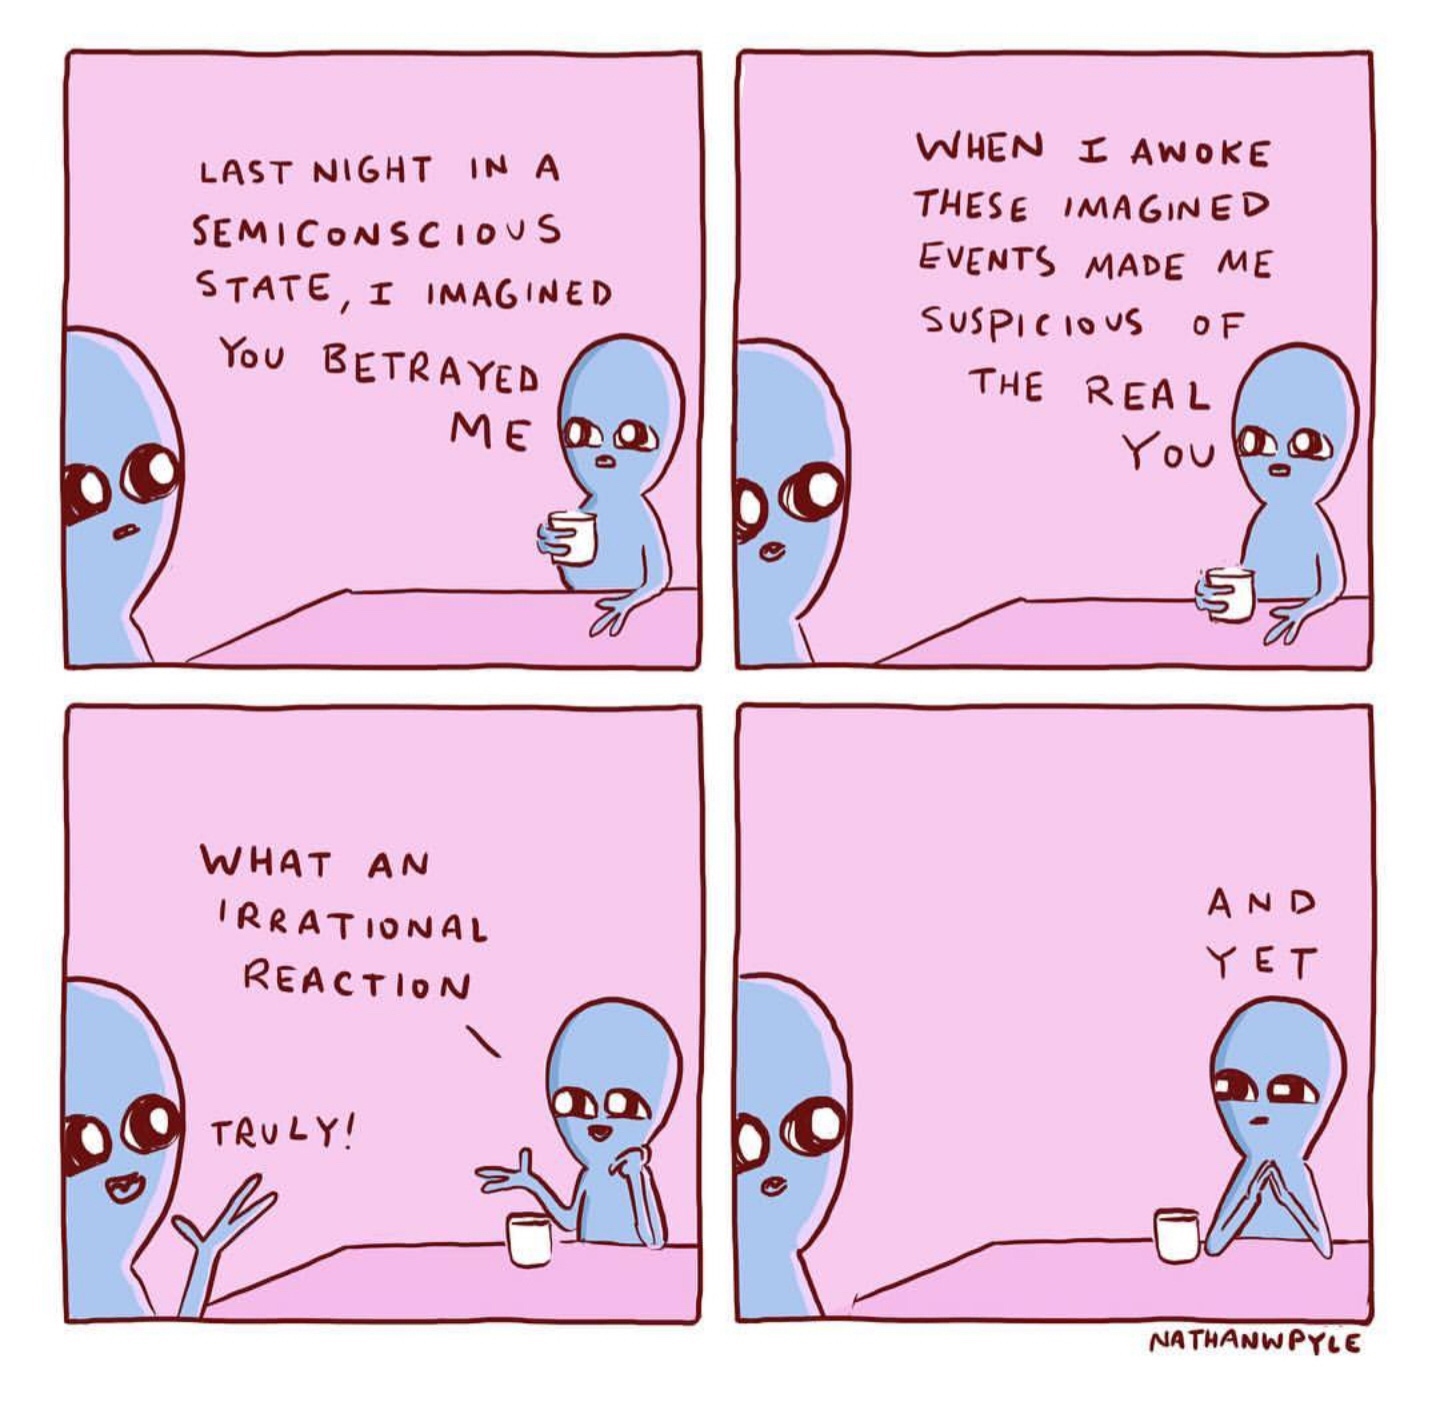 nathan pyle and yet - Last Night In A Semiconscious State, I Imagined When I Awoke These Imagined Events Made Me Suspicious Of The Real You Betrayed Me Do Youpo bo What An Irrational Reaction And Yet Truly! Nathanwpyle